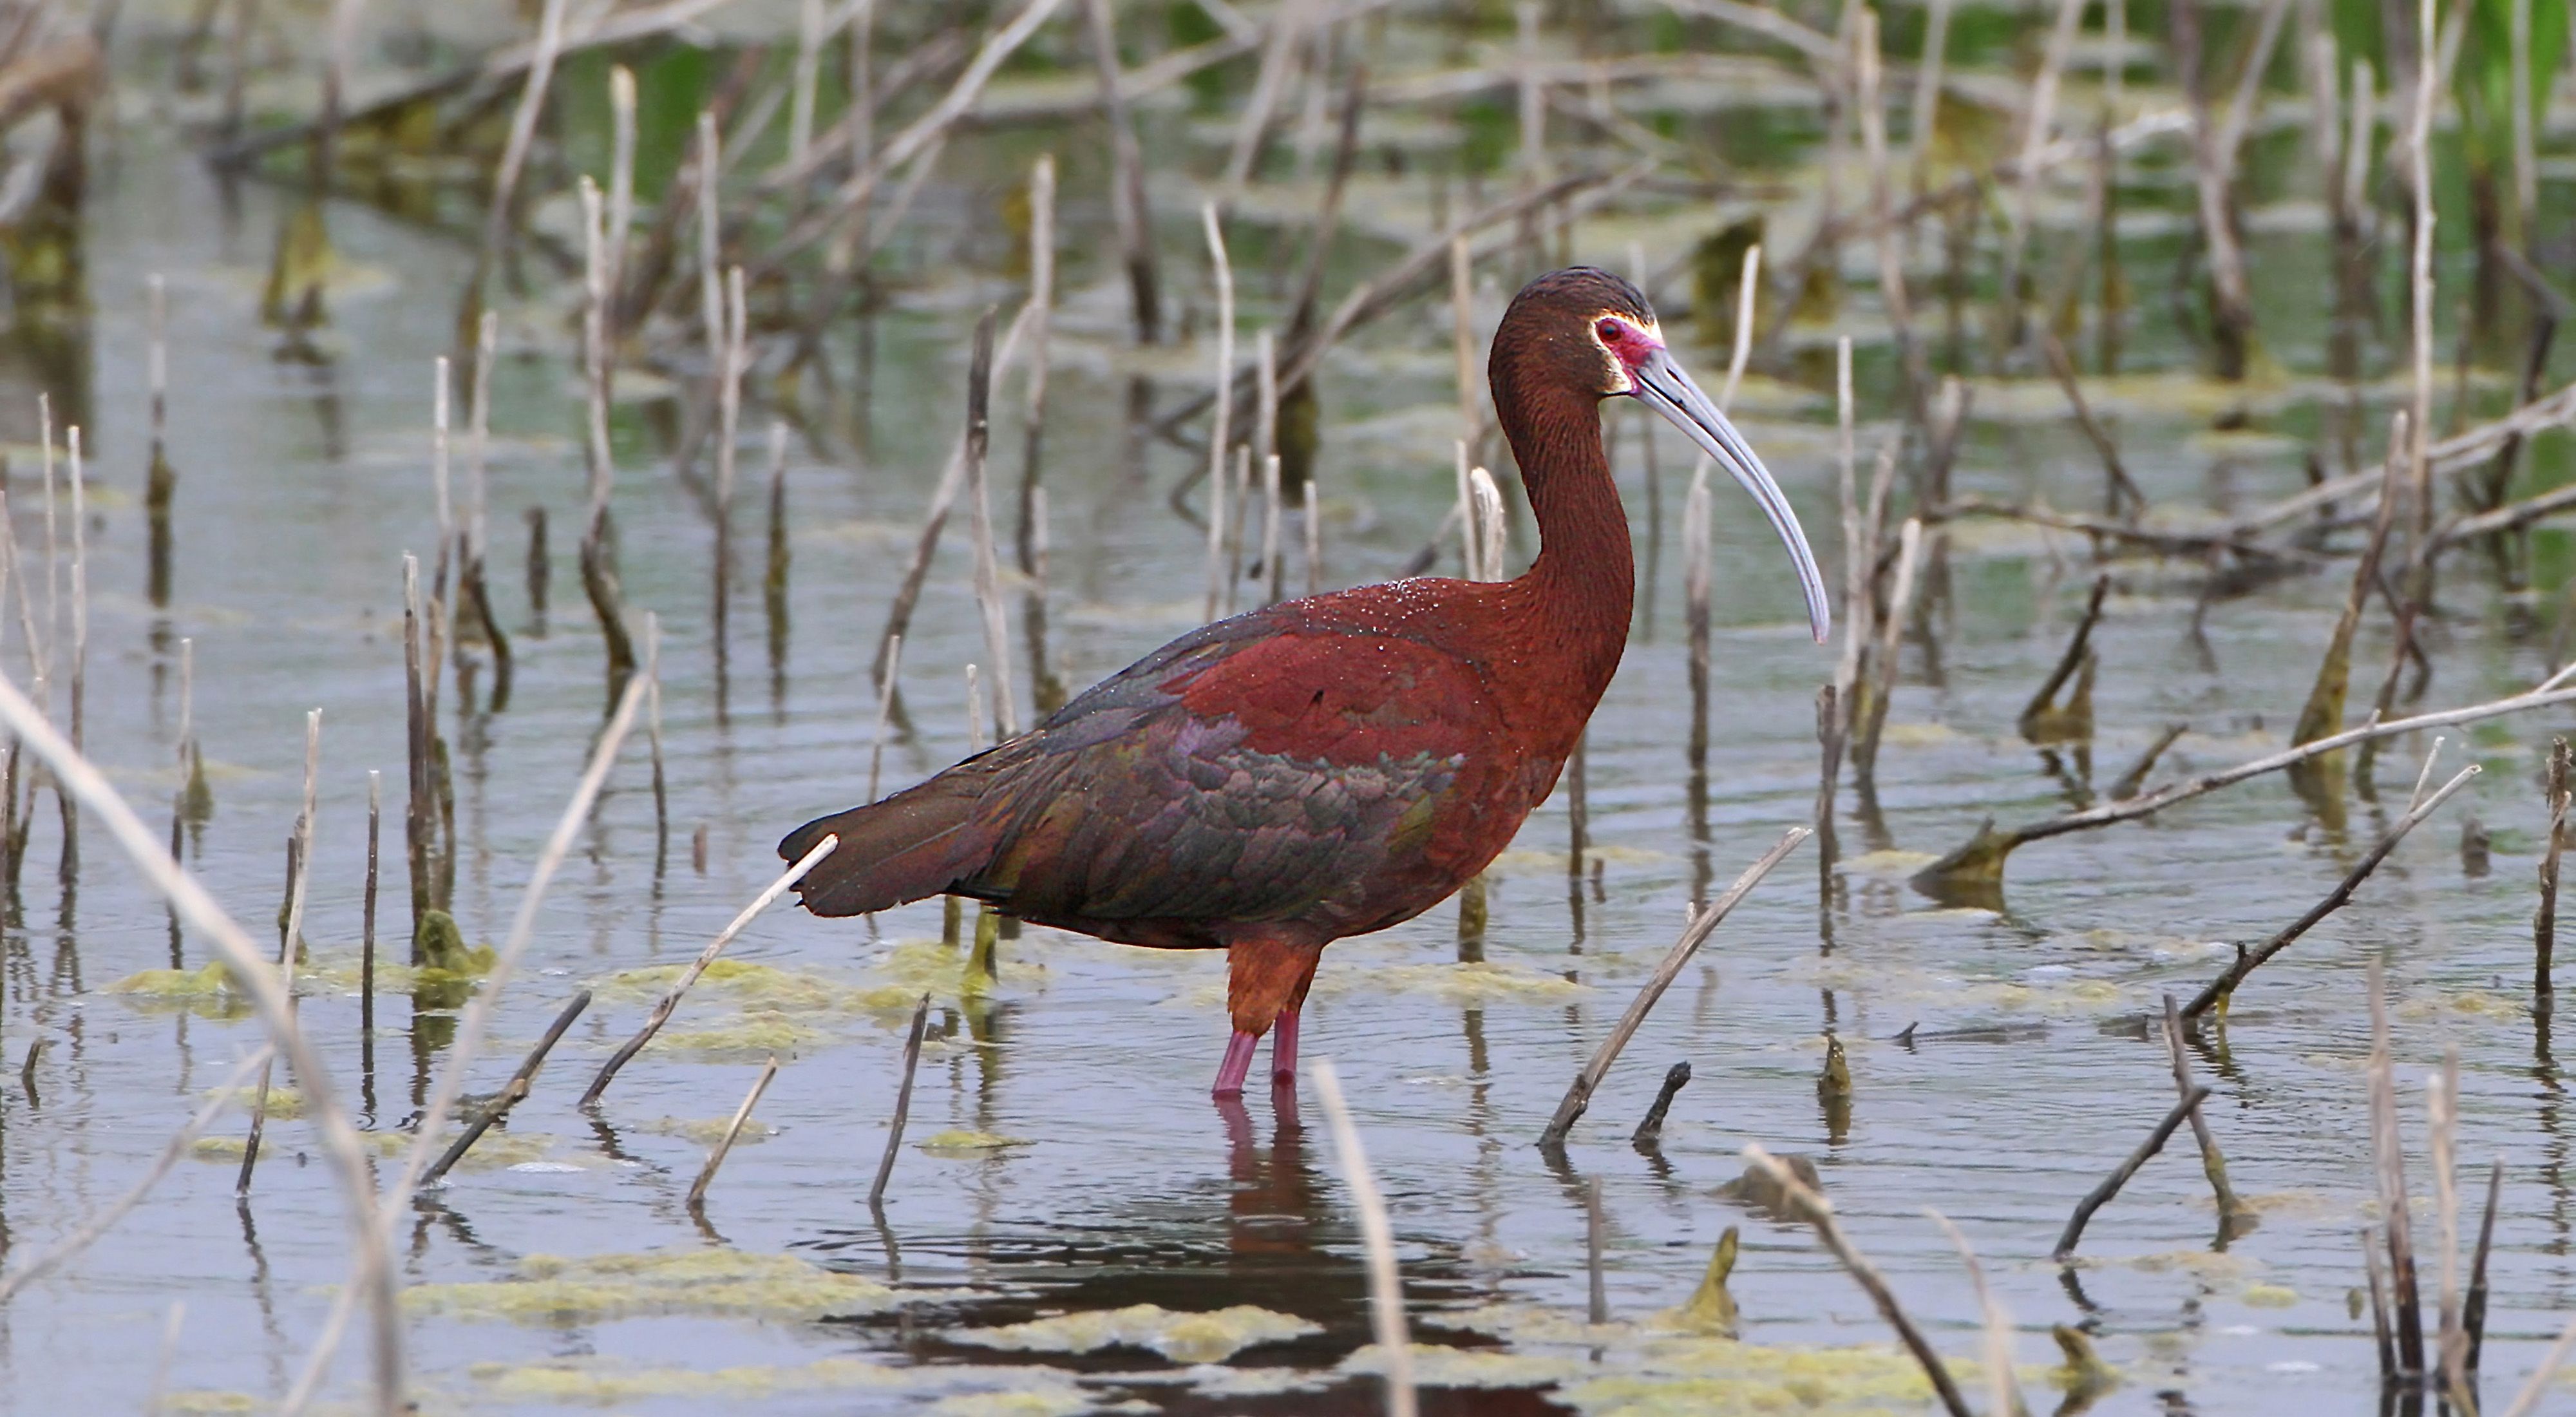 A large wading bird with dark red, purple and gray plumage, a white and pink face and a long beak, stands in water.